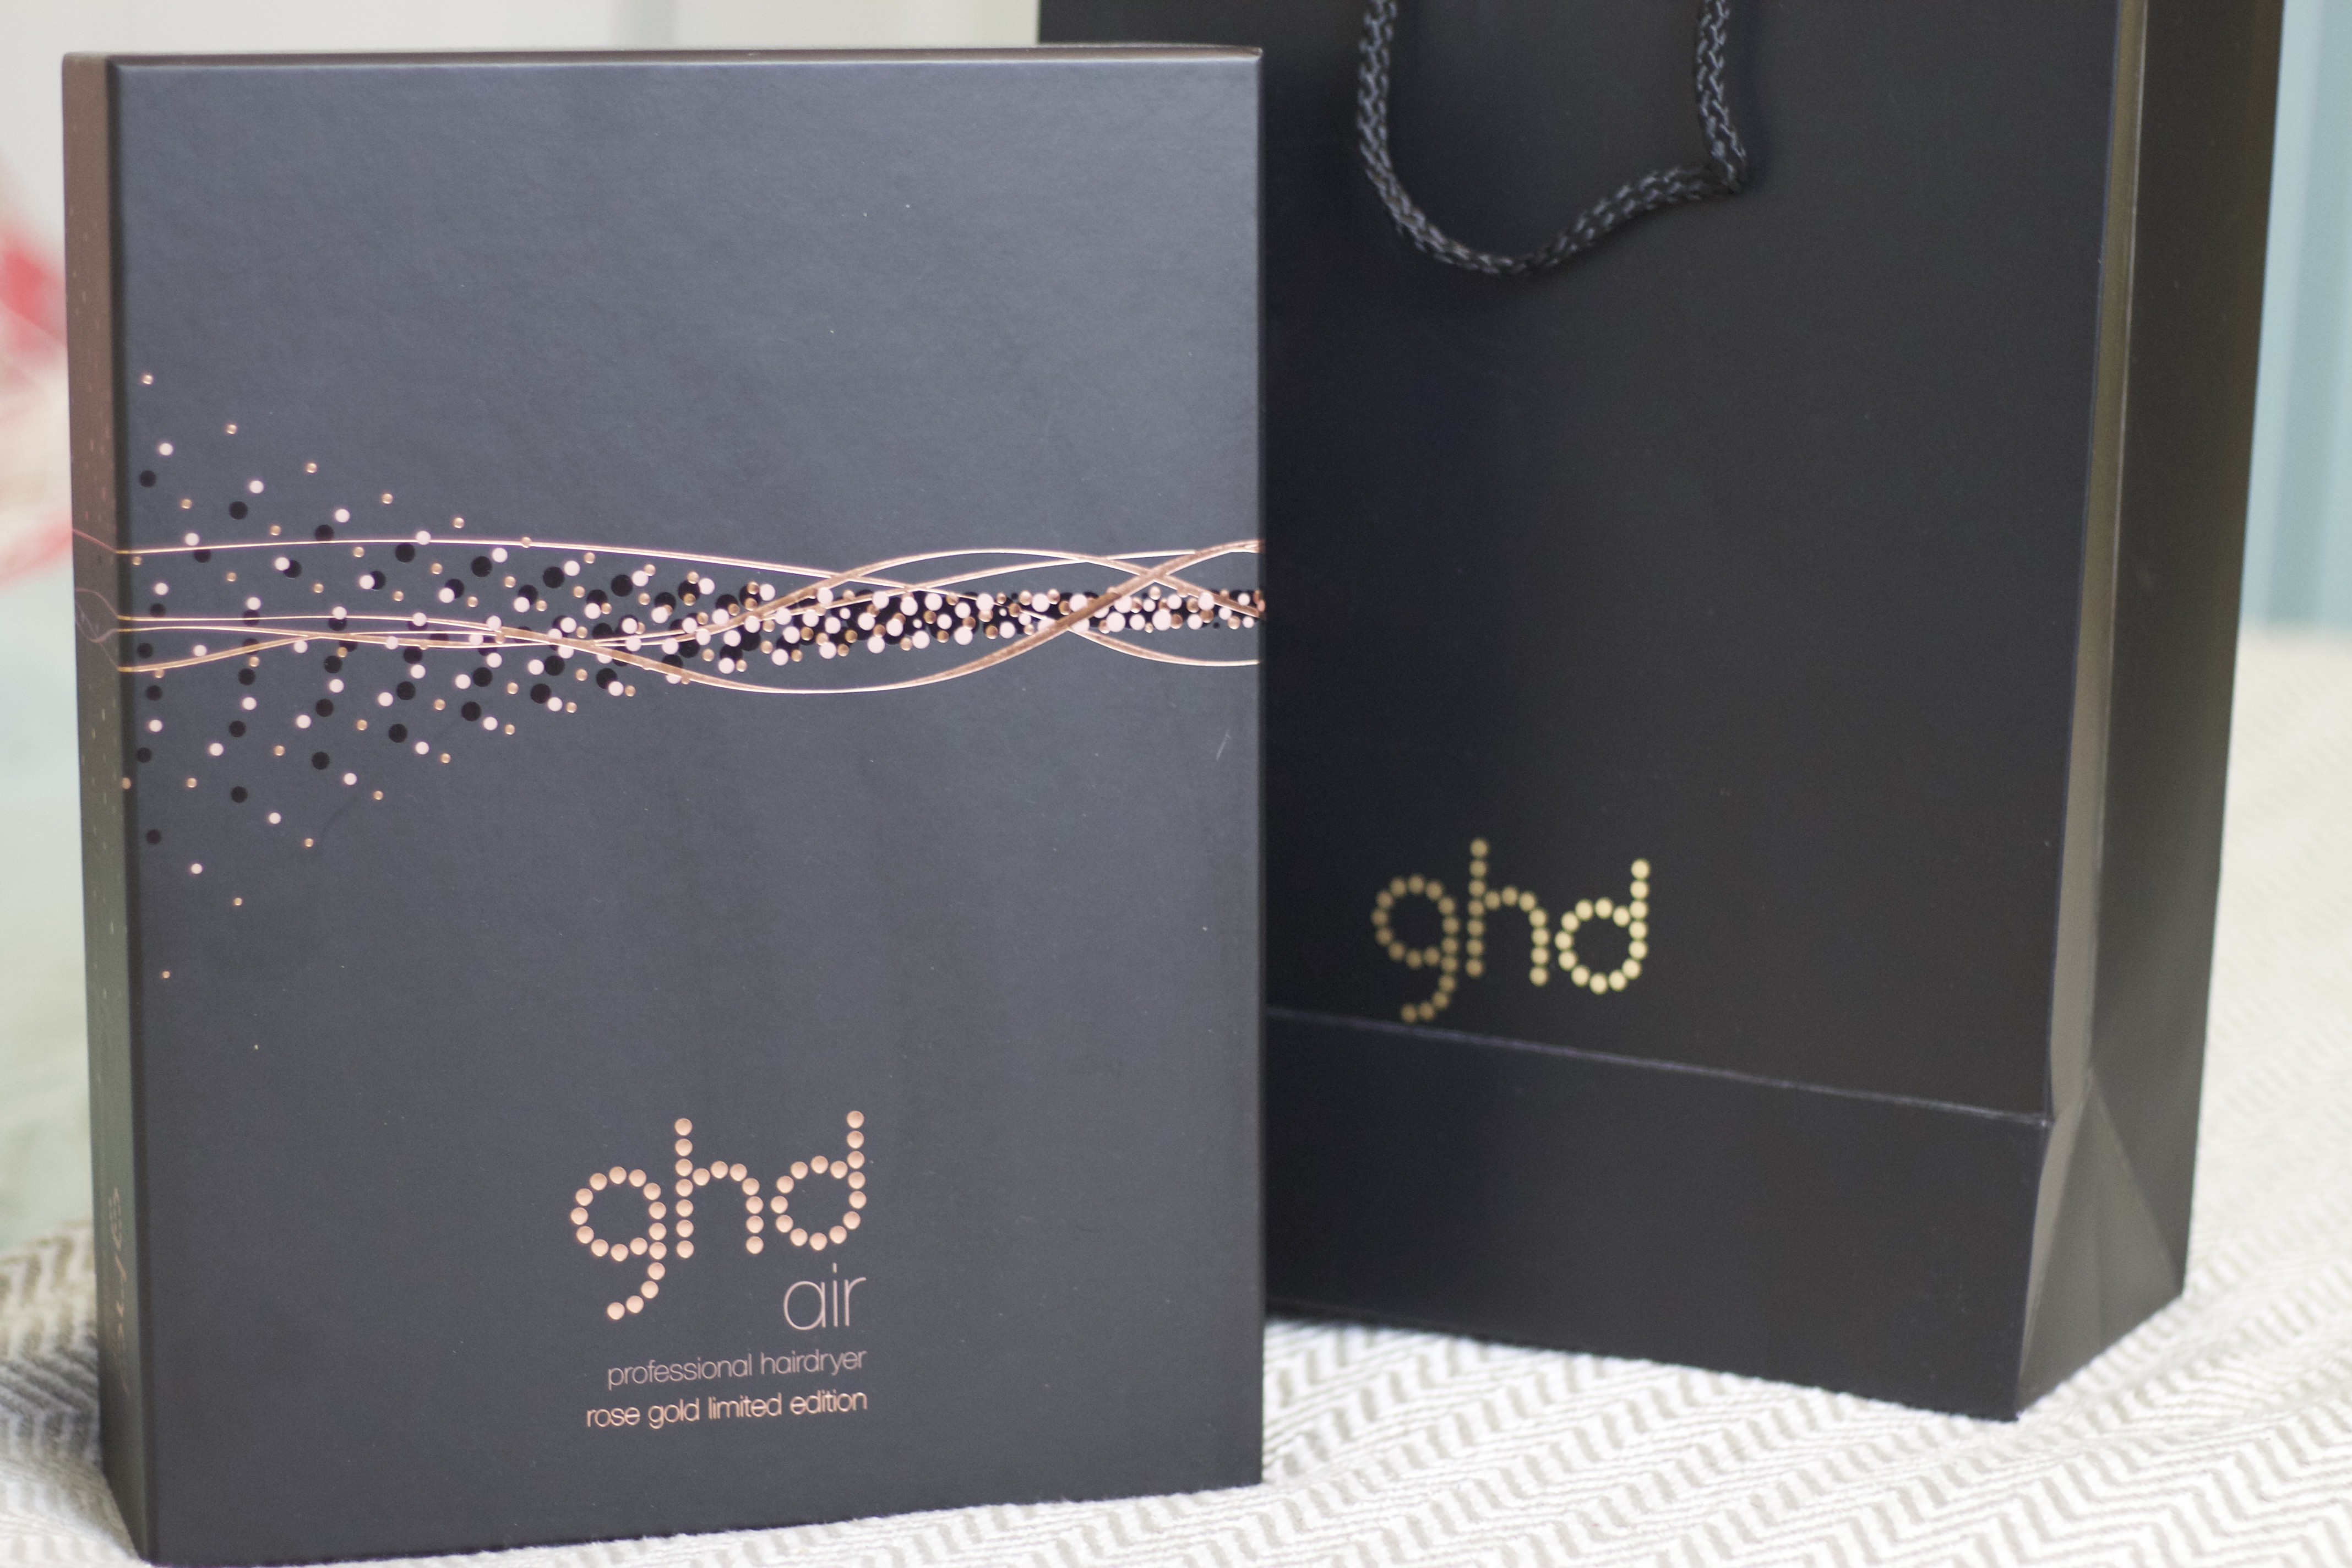 ghd hairdryer: are they worth it?